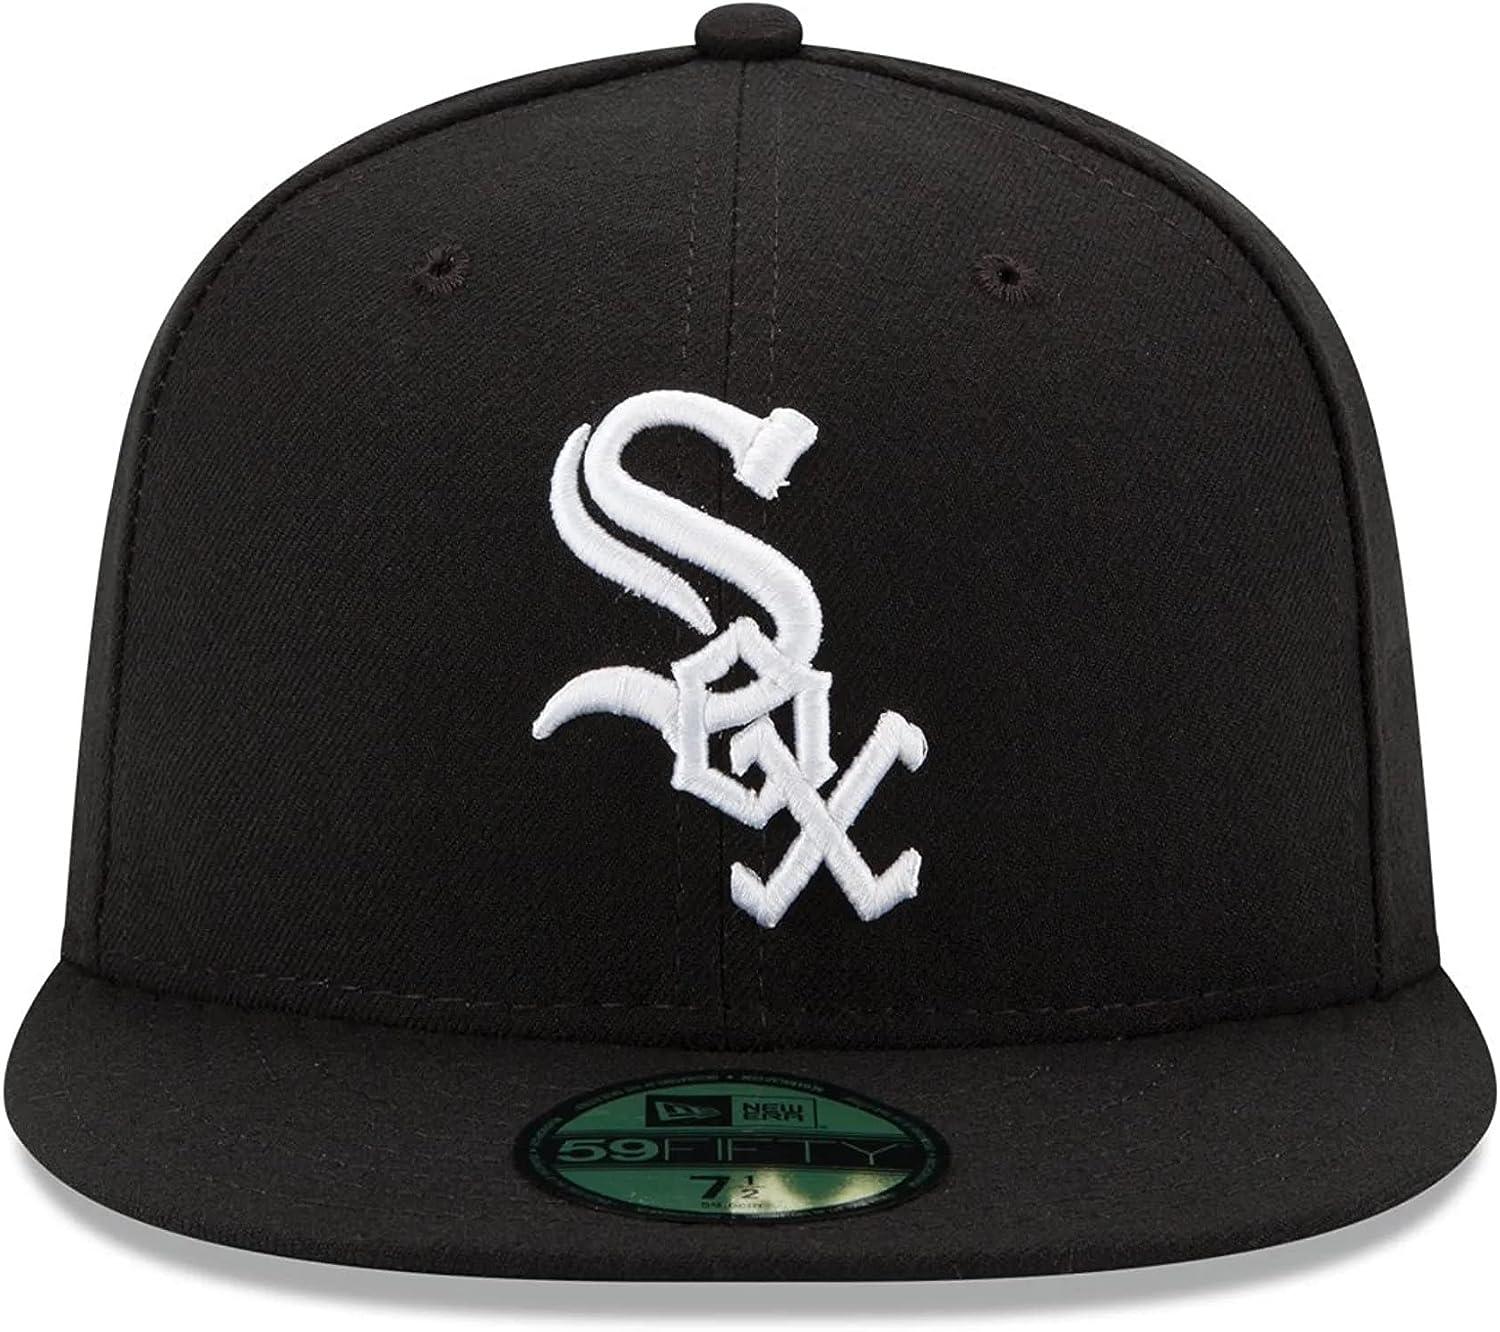  New Era MLB 59FIFTY 2-Tone Authentic Collection Fitted On Field  Game Cap Hat : Sports & Outdoors